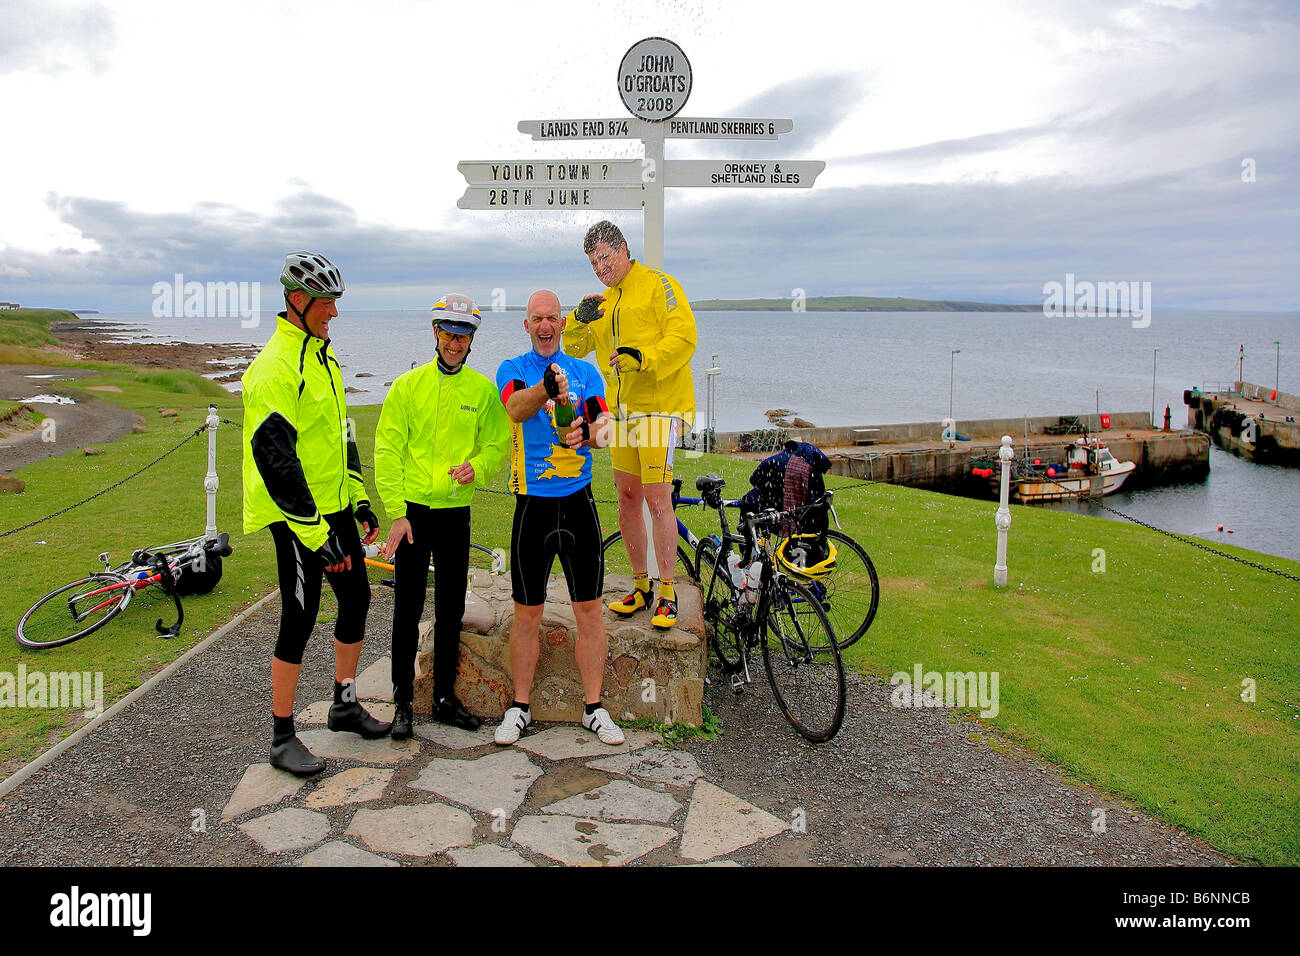 Male Cyclists Celebrating Lands End John O Groats Post End to End Long Distance Cycle Ride Caithness Highlands Scotland UK Stock Photo